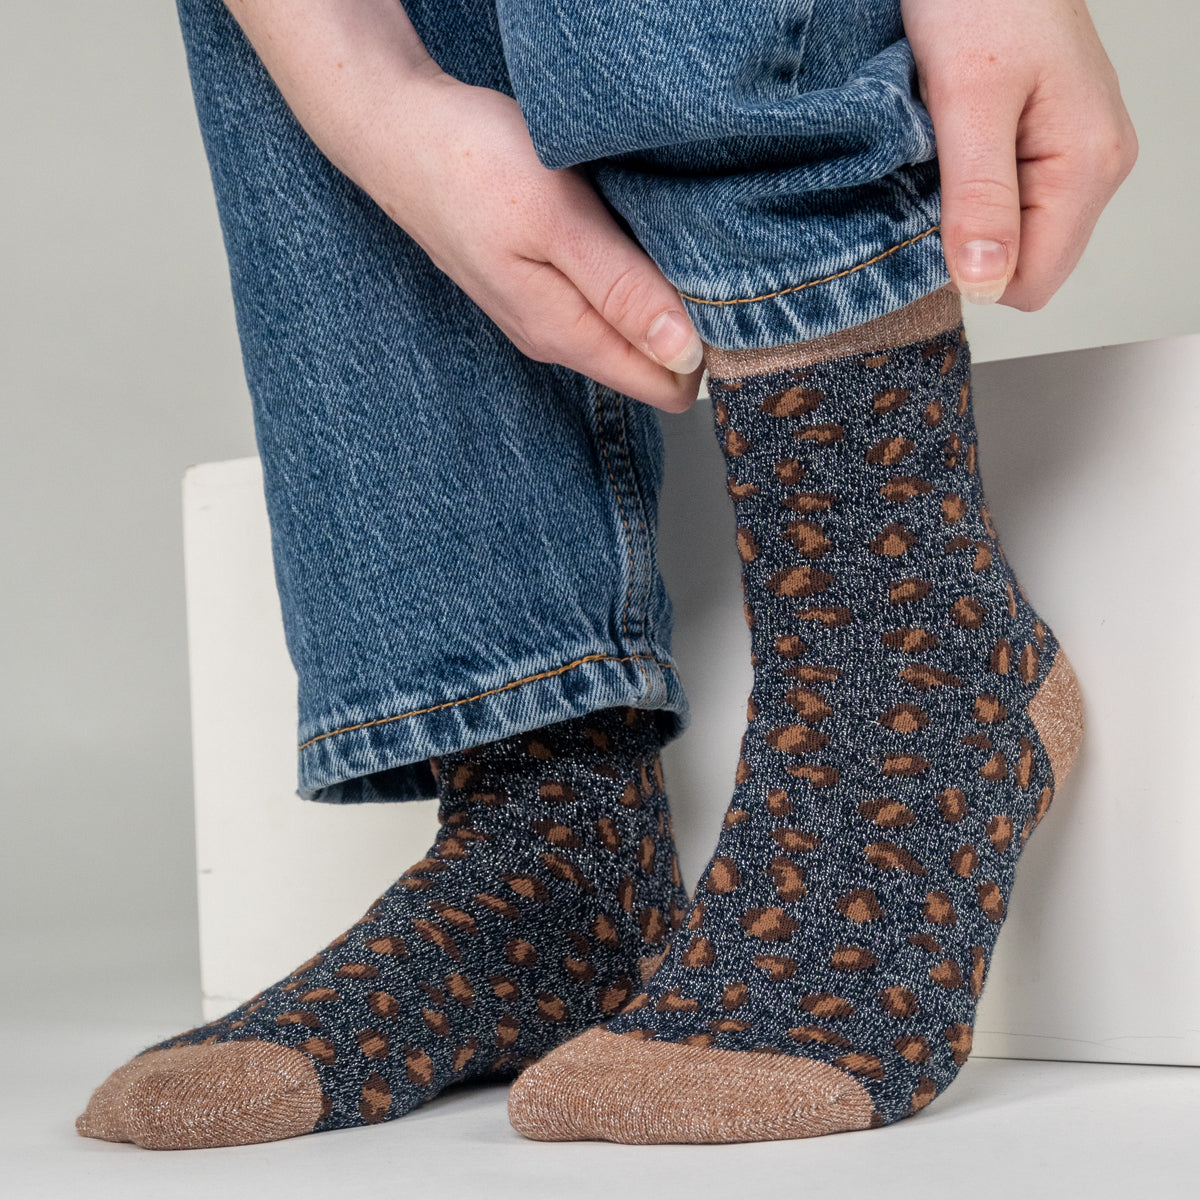 Socks in combed cotton Leopard - Navy and brown